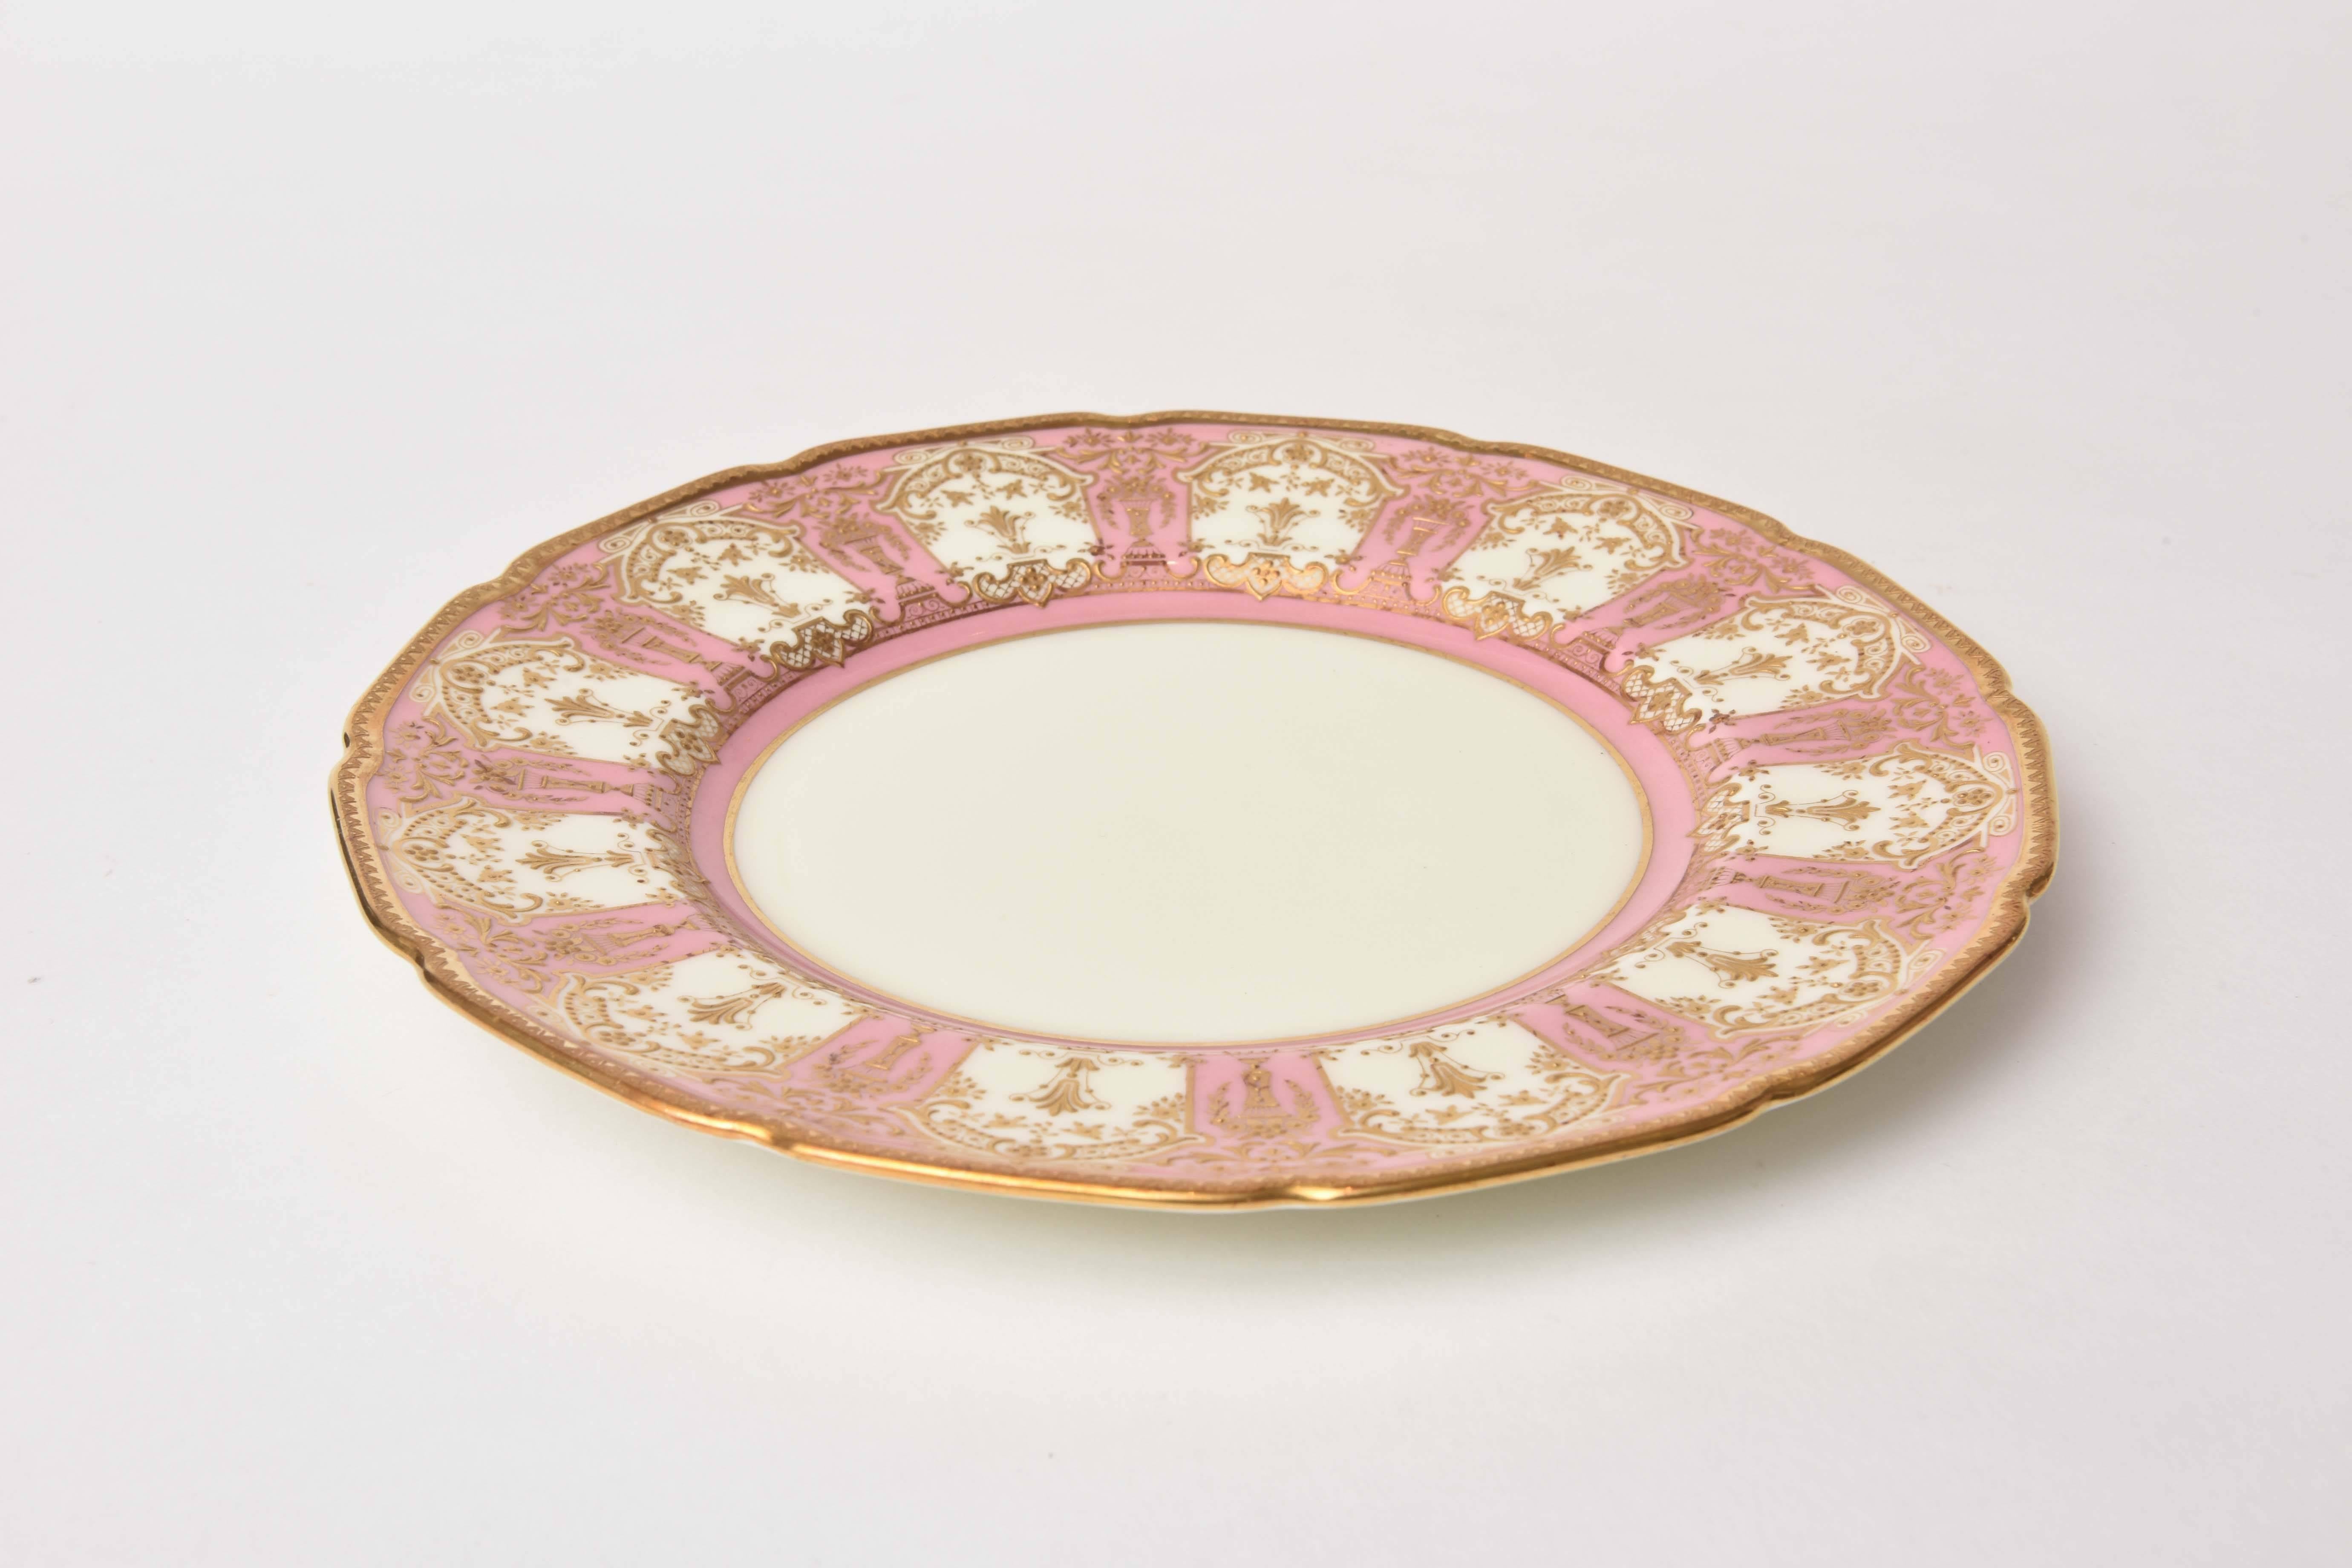 12 Exquisite Pink and Heavily Gilded Dessert or Salad Plates, Antique English 1